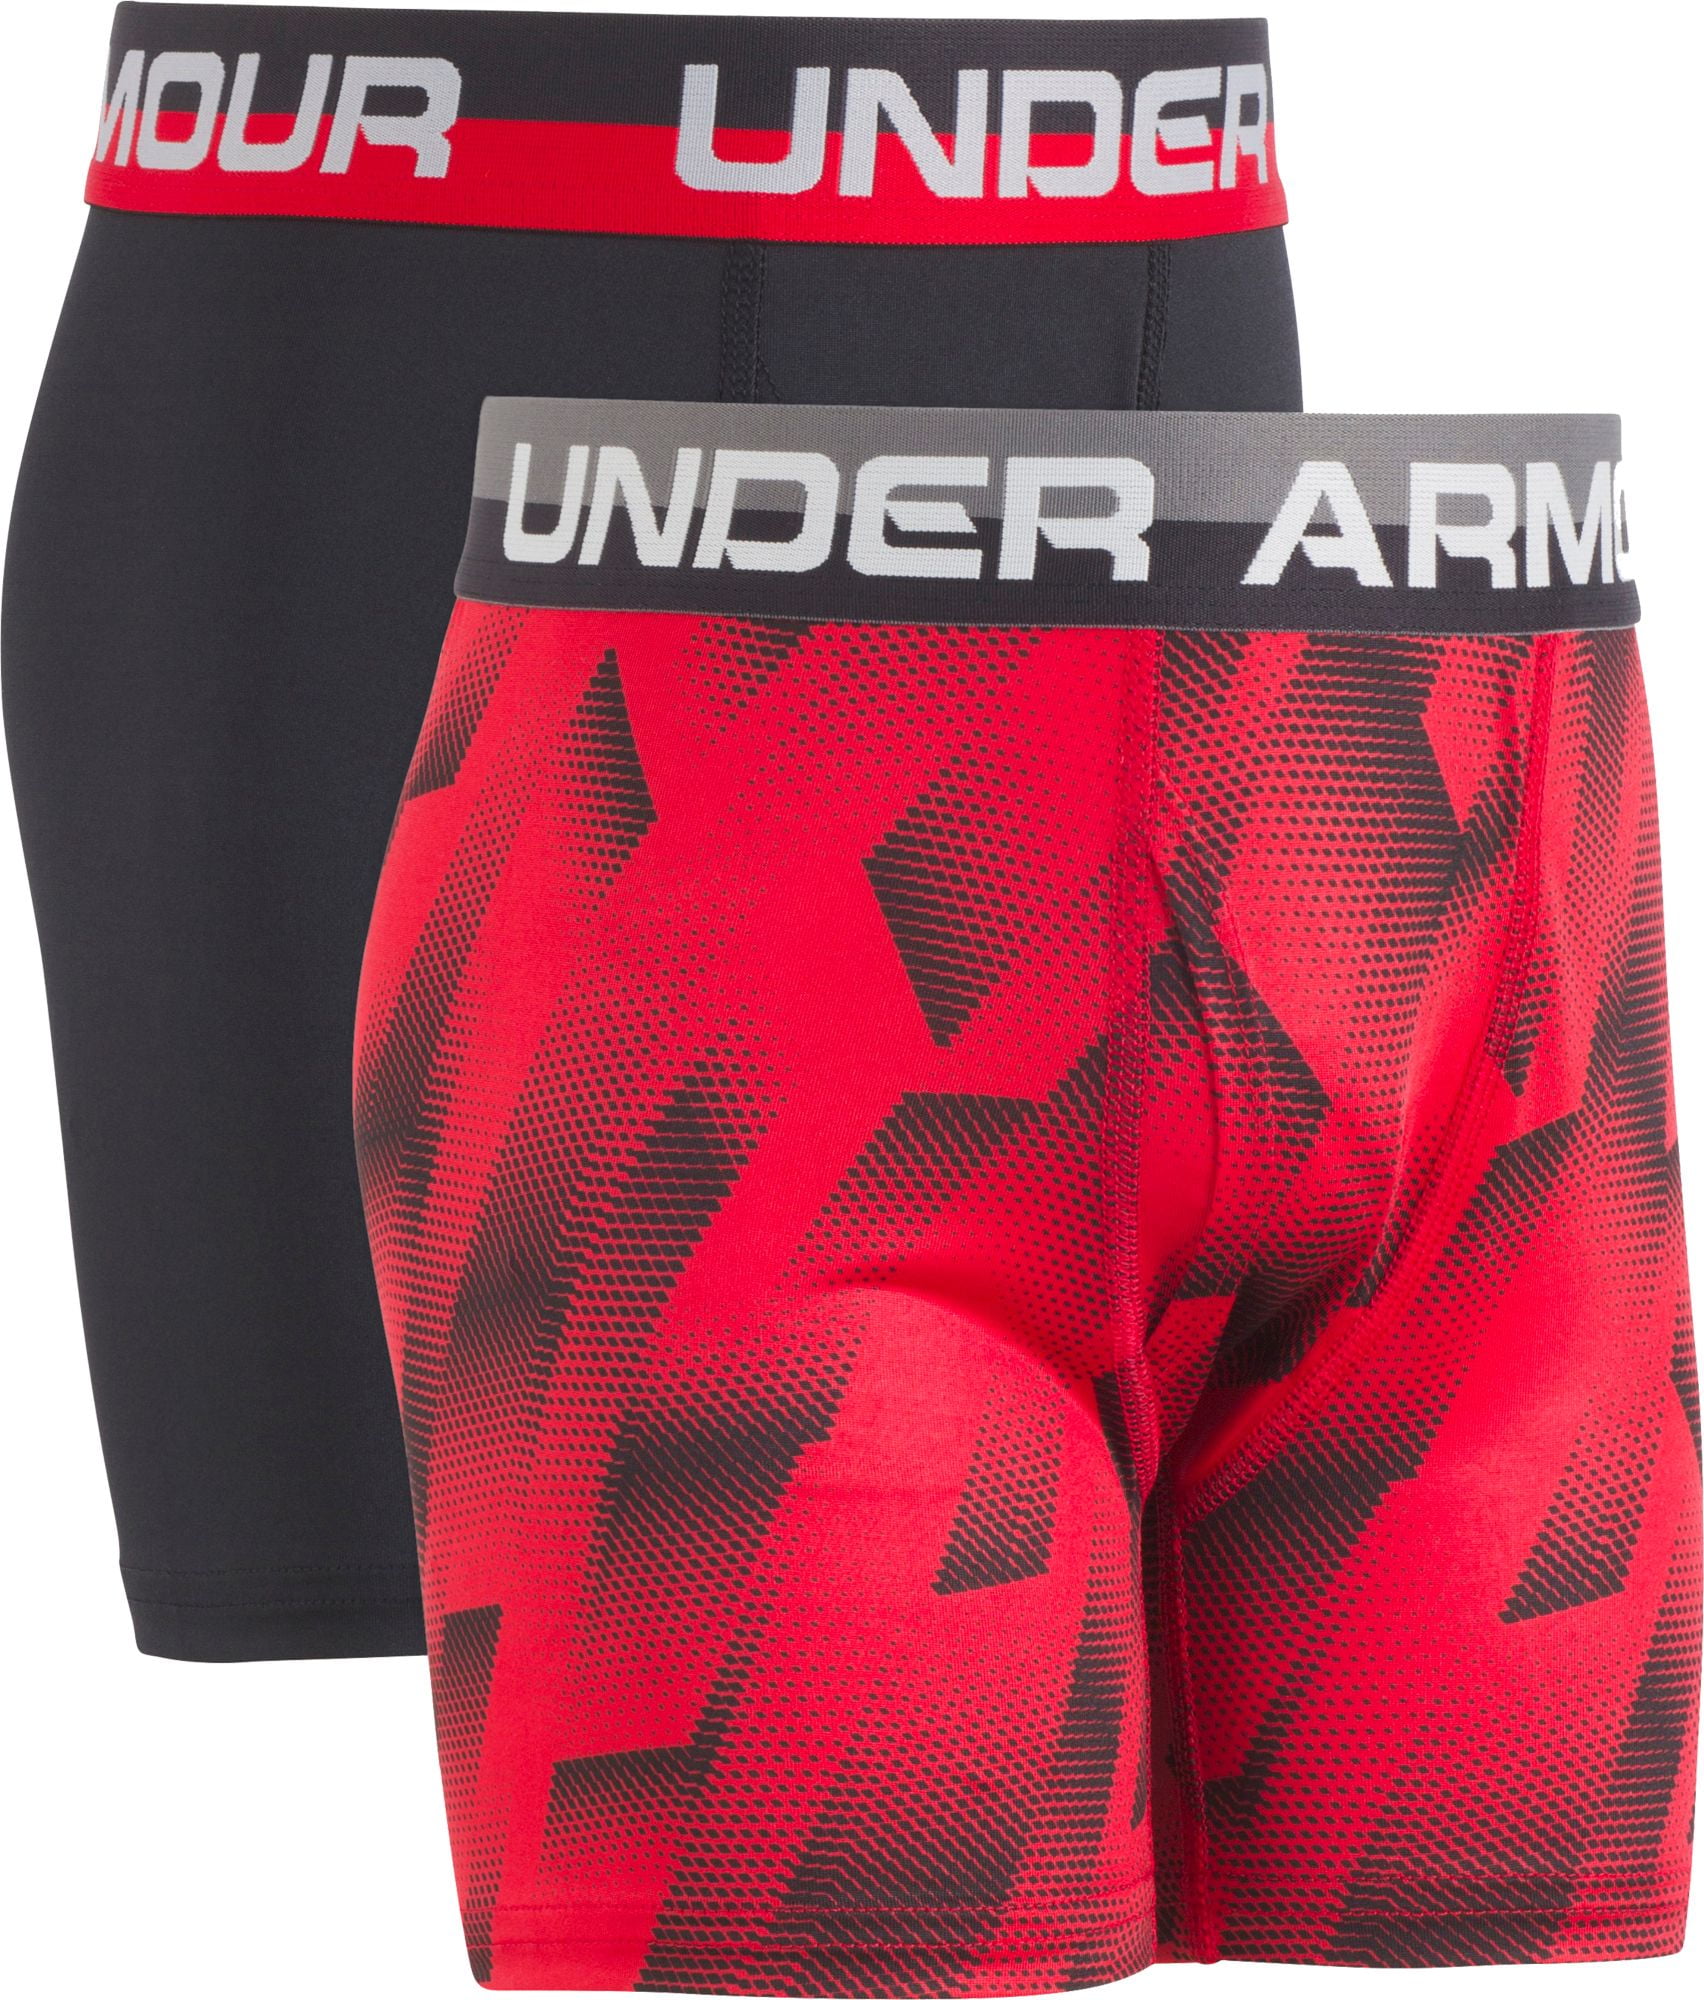 Under Armour Boys' Big Performance Boxer Briefs, Lightweight & Smooth  Stretch Fit, red/Black Print, YMD 